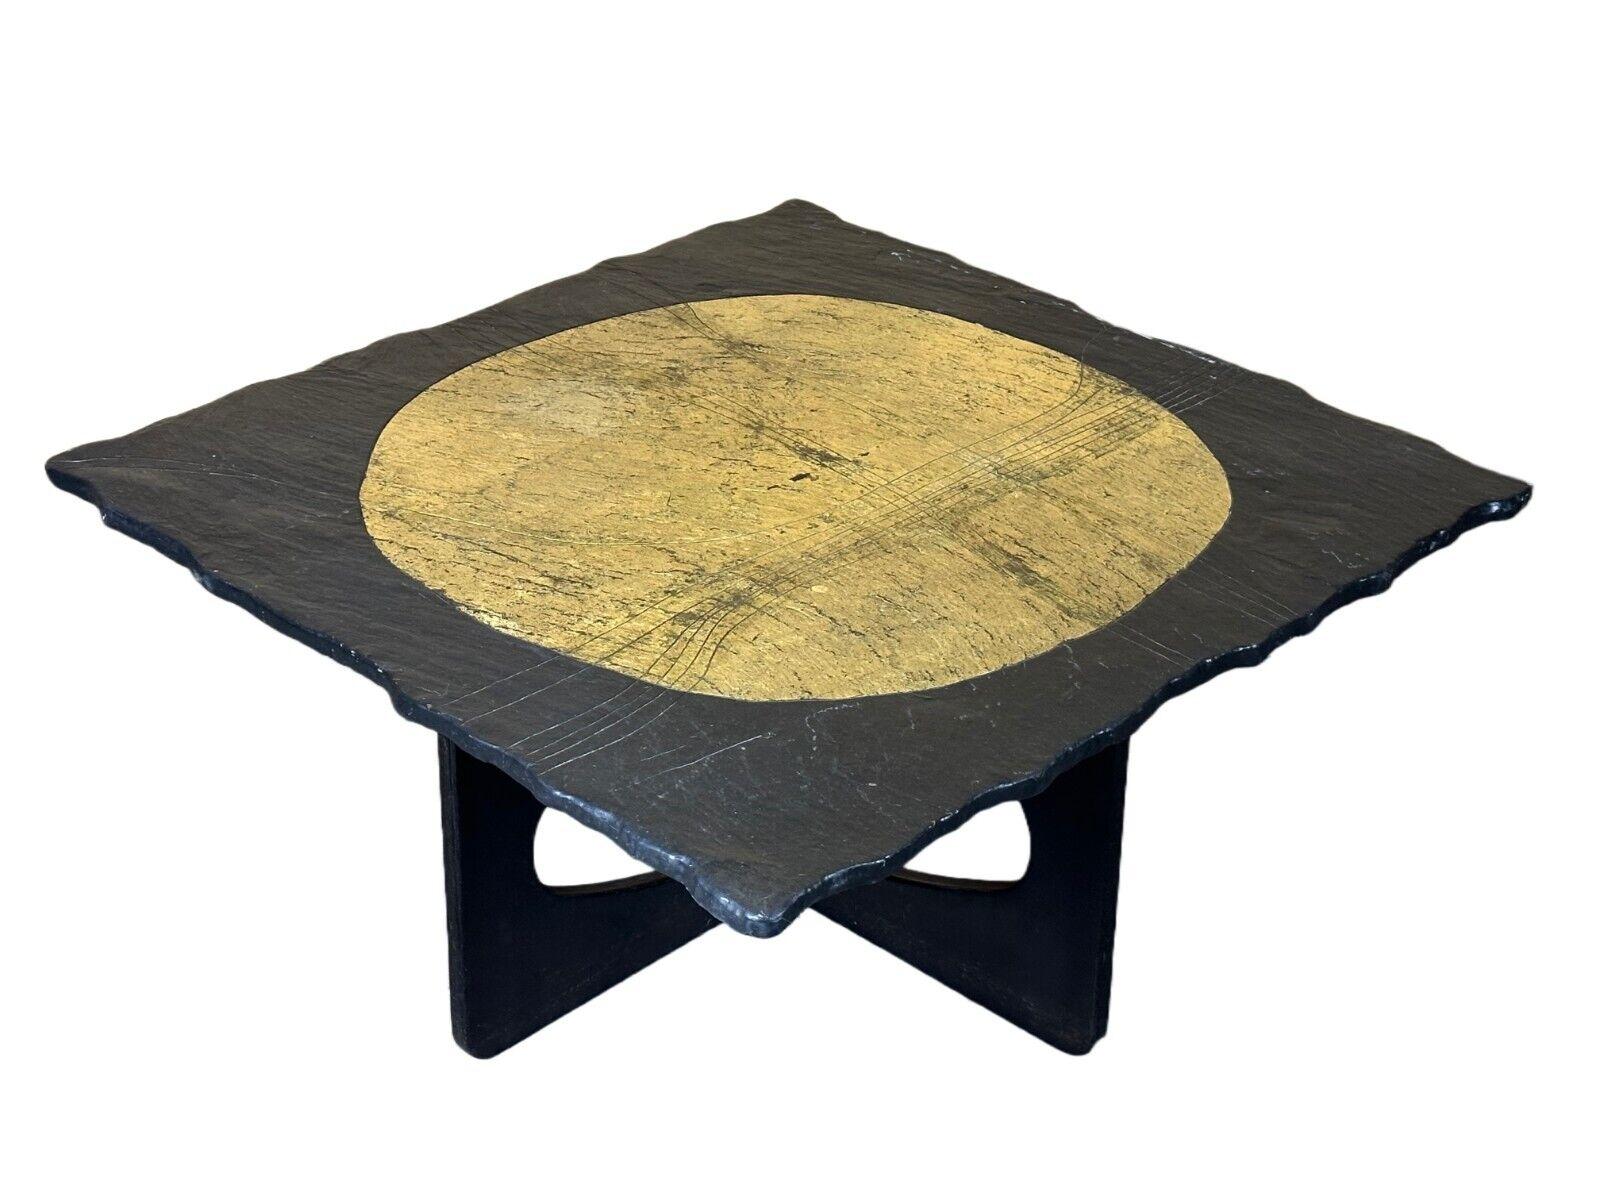 60s 70s Brutalist Coffee Table Side Table Slate Top Design

Object: coffee table

Manufacturer:

Condition: good - vintage

Age: around 1960-1970

Dimensions:

Width = 100cm
Depth = 100cm
Height = 47cm

Material: slate, wood

Other notes:

The